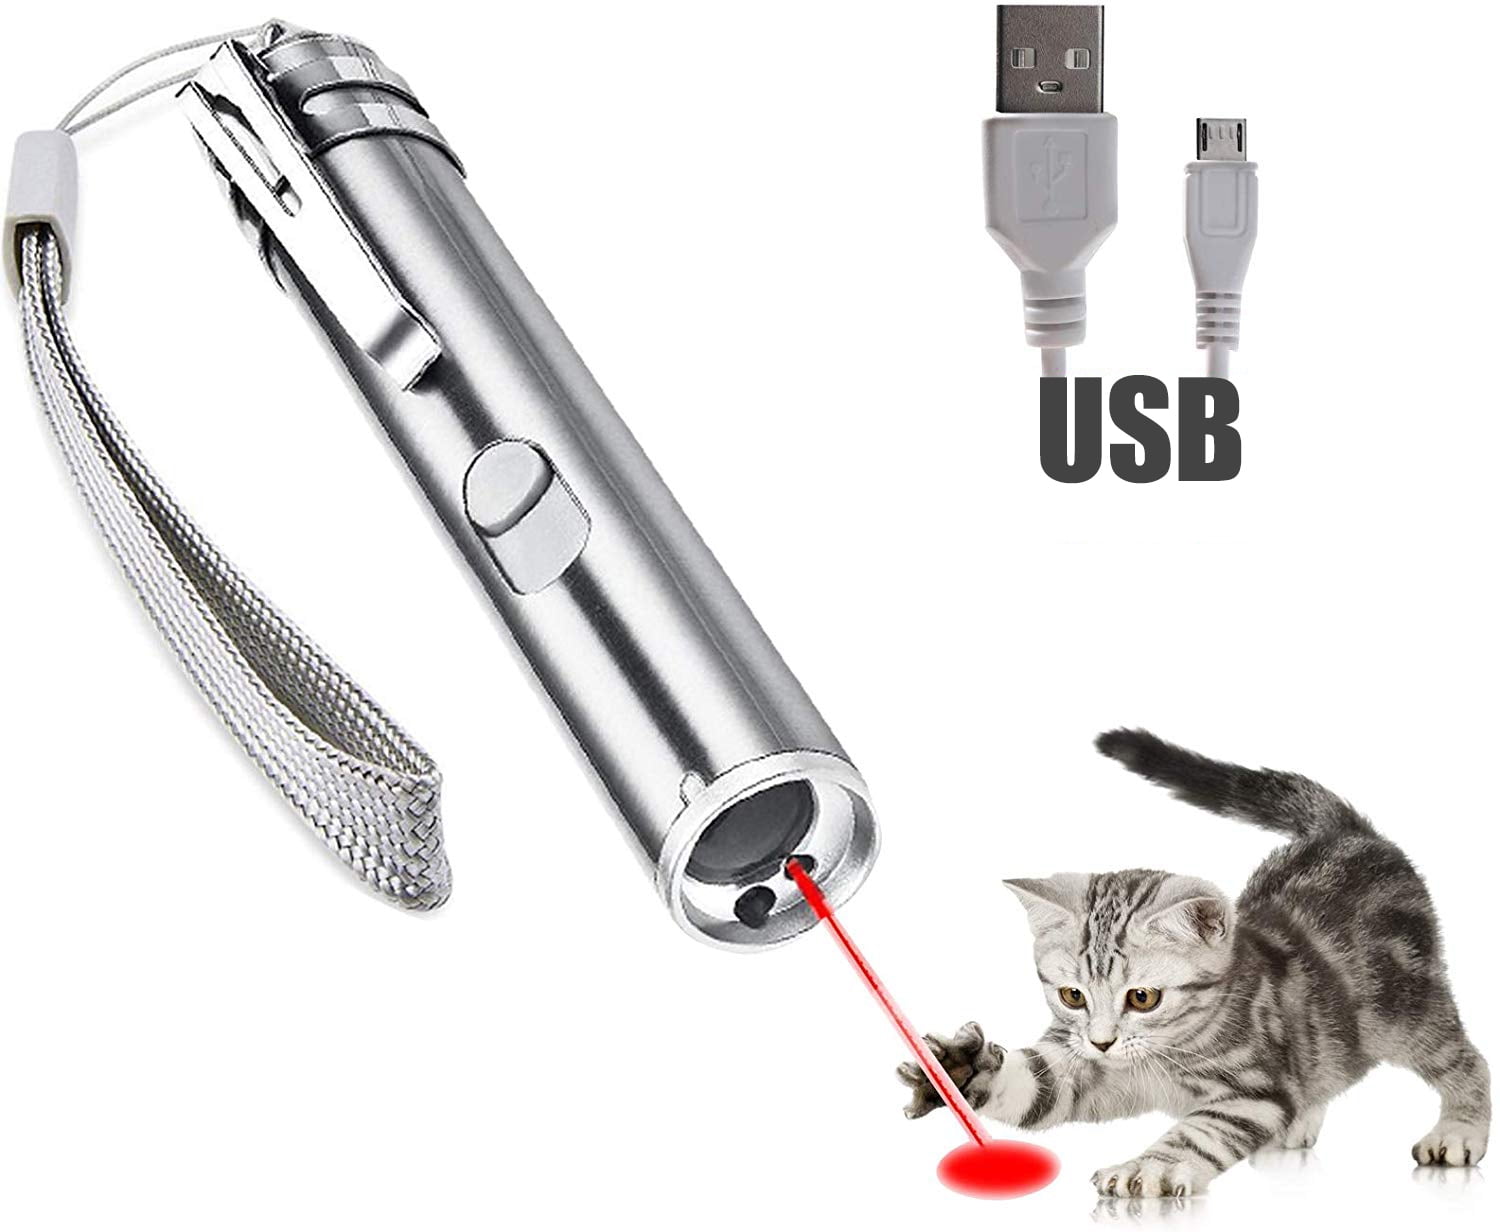 Details about   USB LASER POINTER RECHARGEABLE PEN ~ 3 in 1 Cat Pet Toy Red UV Flashlight PP